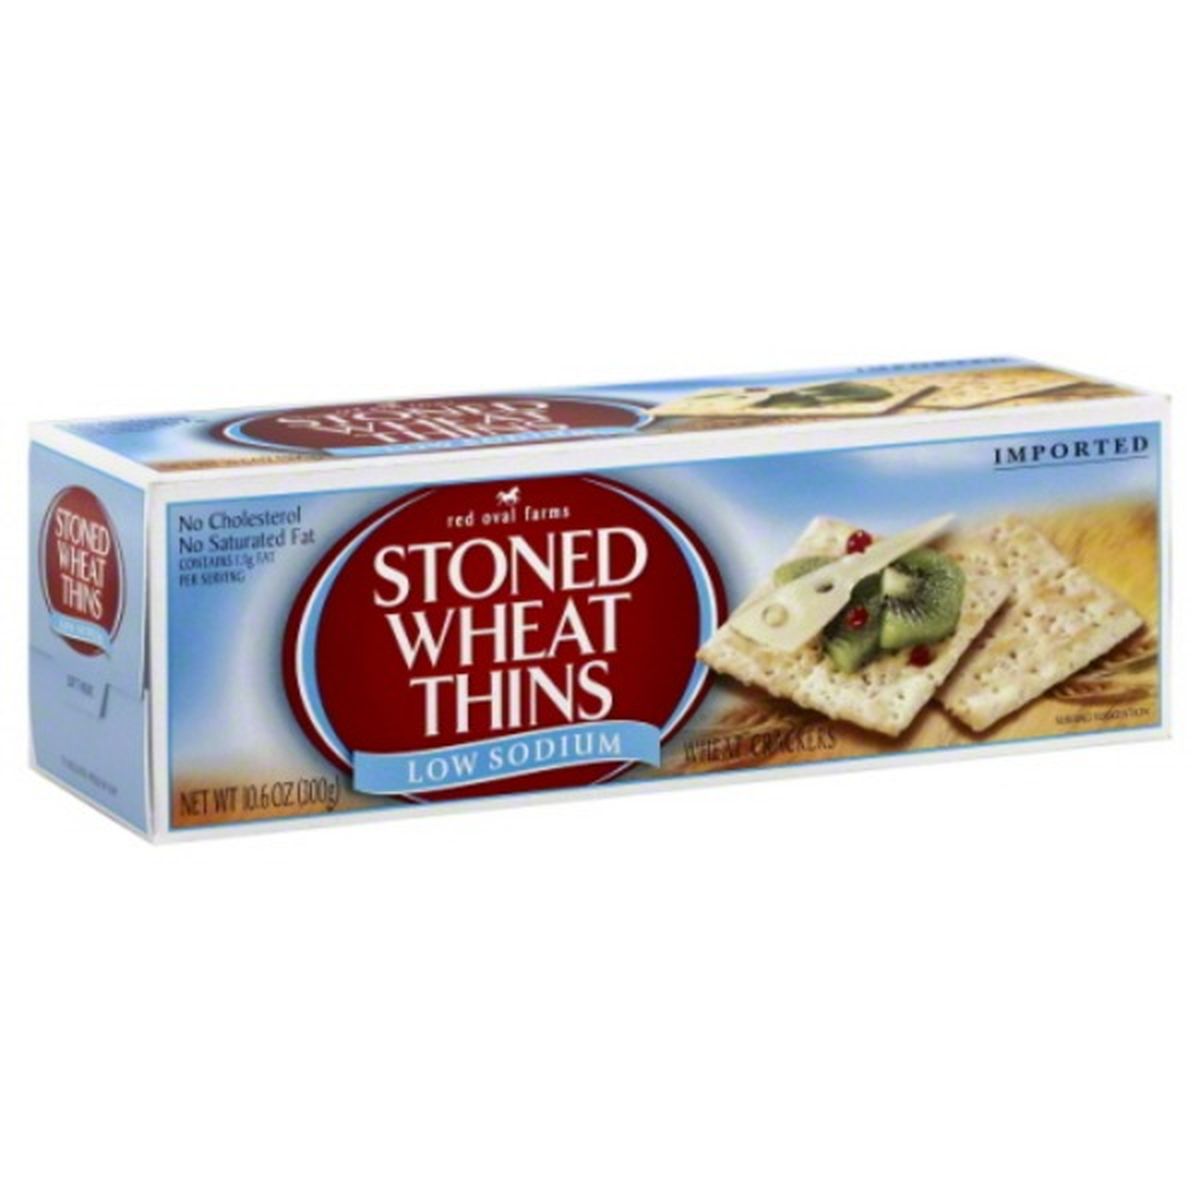 Calories in Stoned Wheat Thins Stoned Wheat Thins Wheat Crackers, Low Sodium